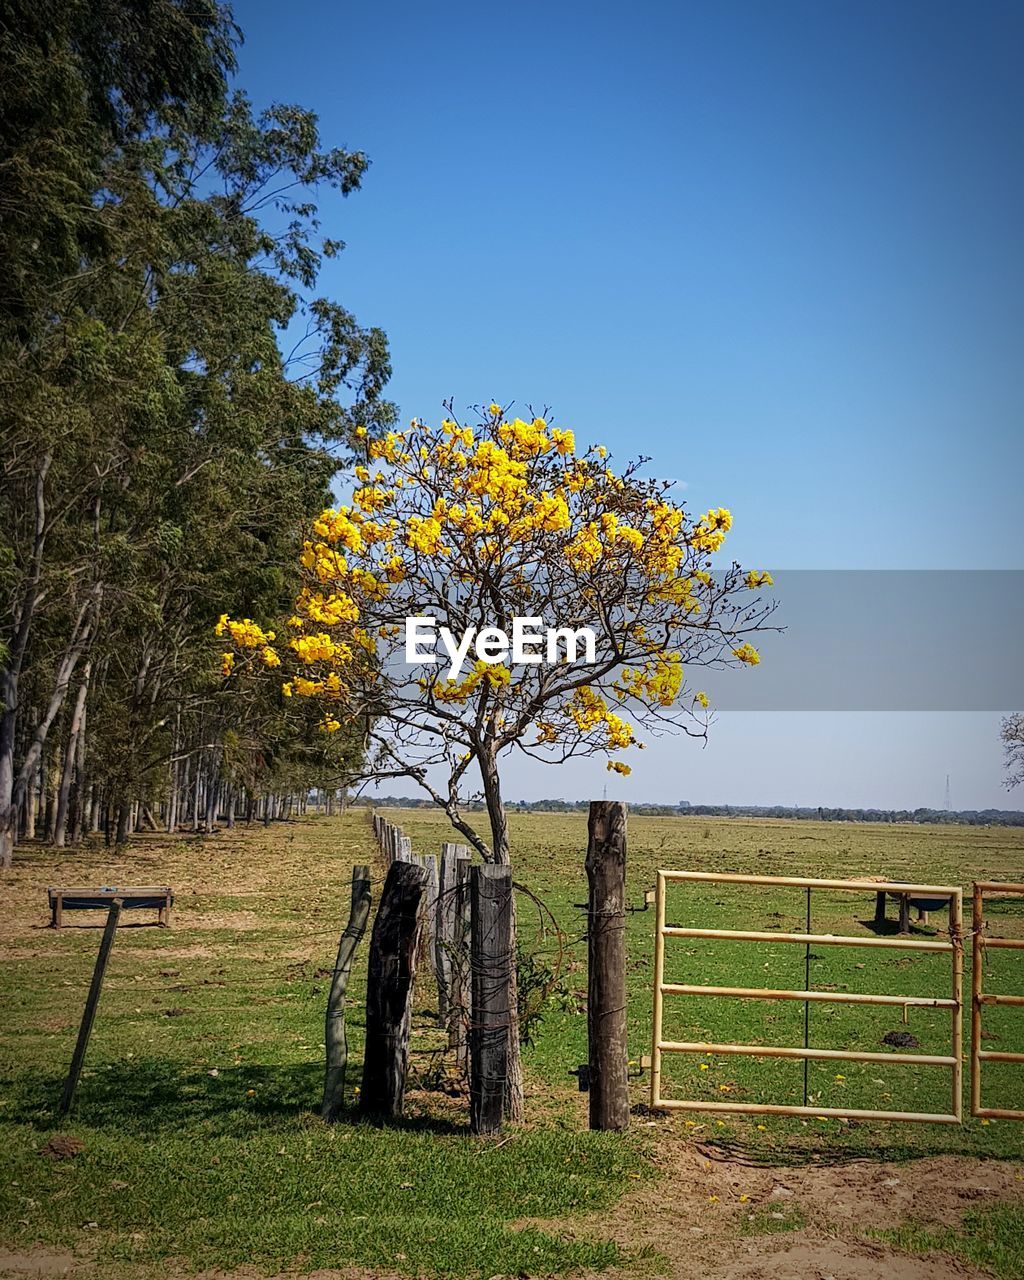 VIEW OF TREE ON FIELD AGAINST CLEAR SKY